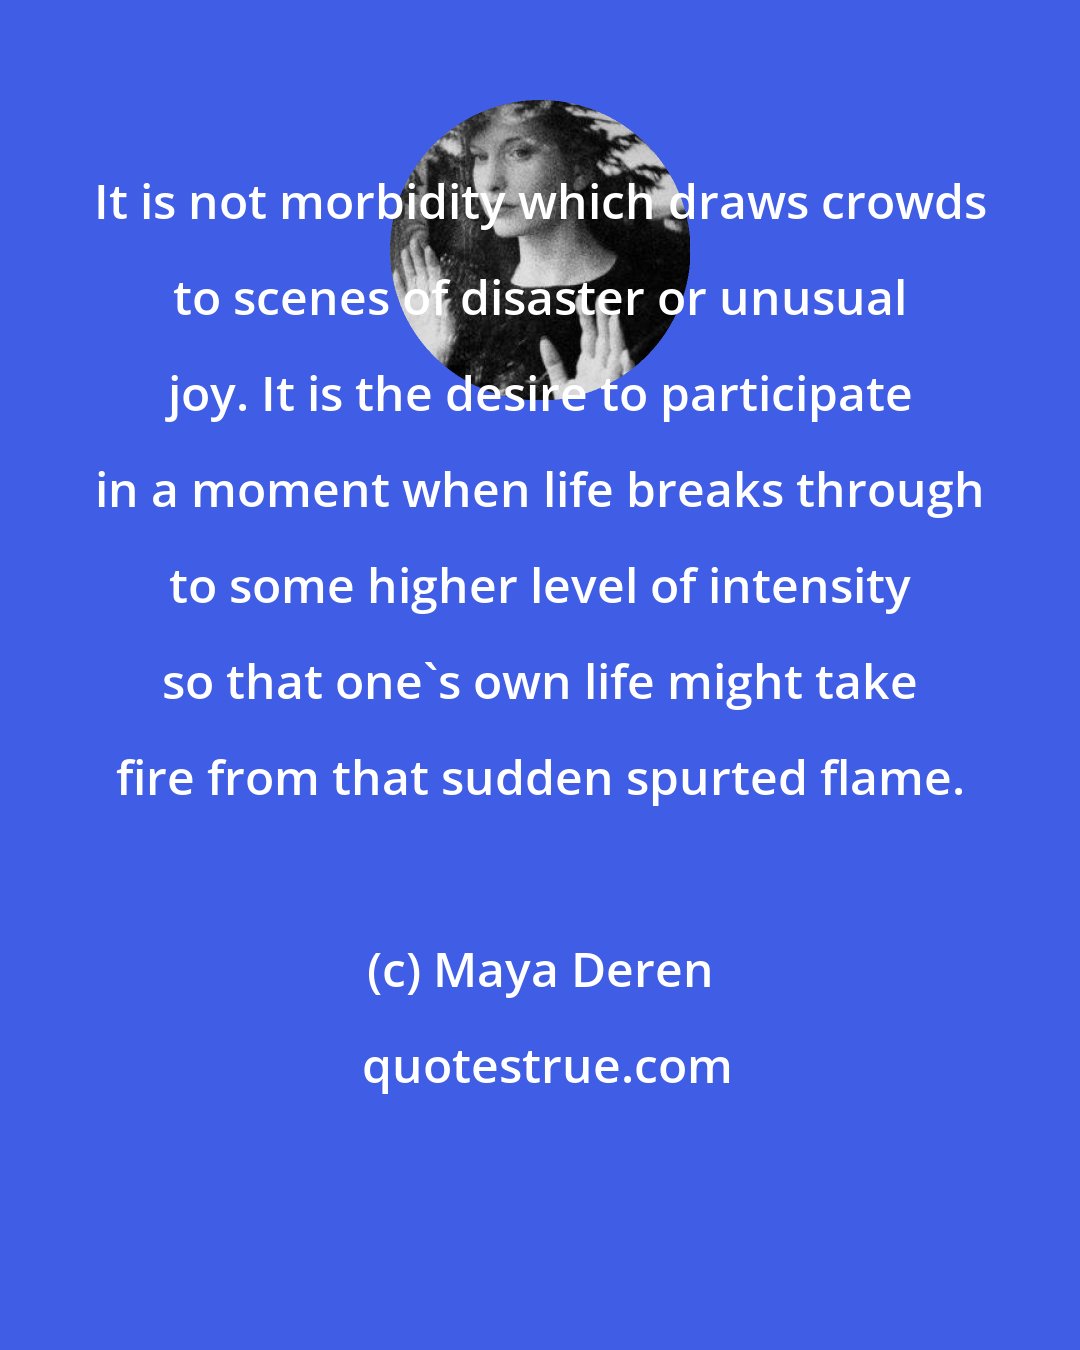 Maya Deren: It is not morbidity which draws crowds to scenes of disaster or unusual joy. It is the desire to participate in a moment when life breaks through to some higher level of intensity so that one's own life might take fire from that sudden spurted flame.